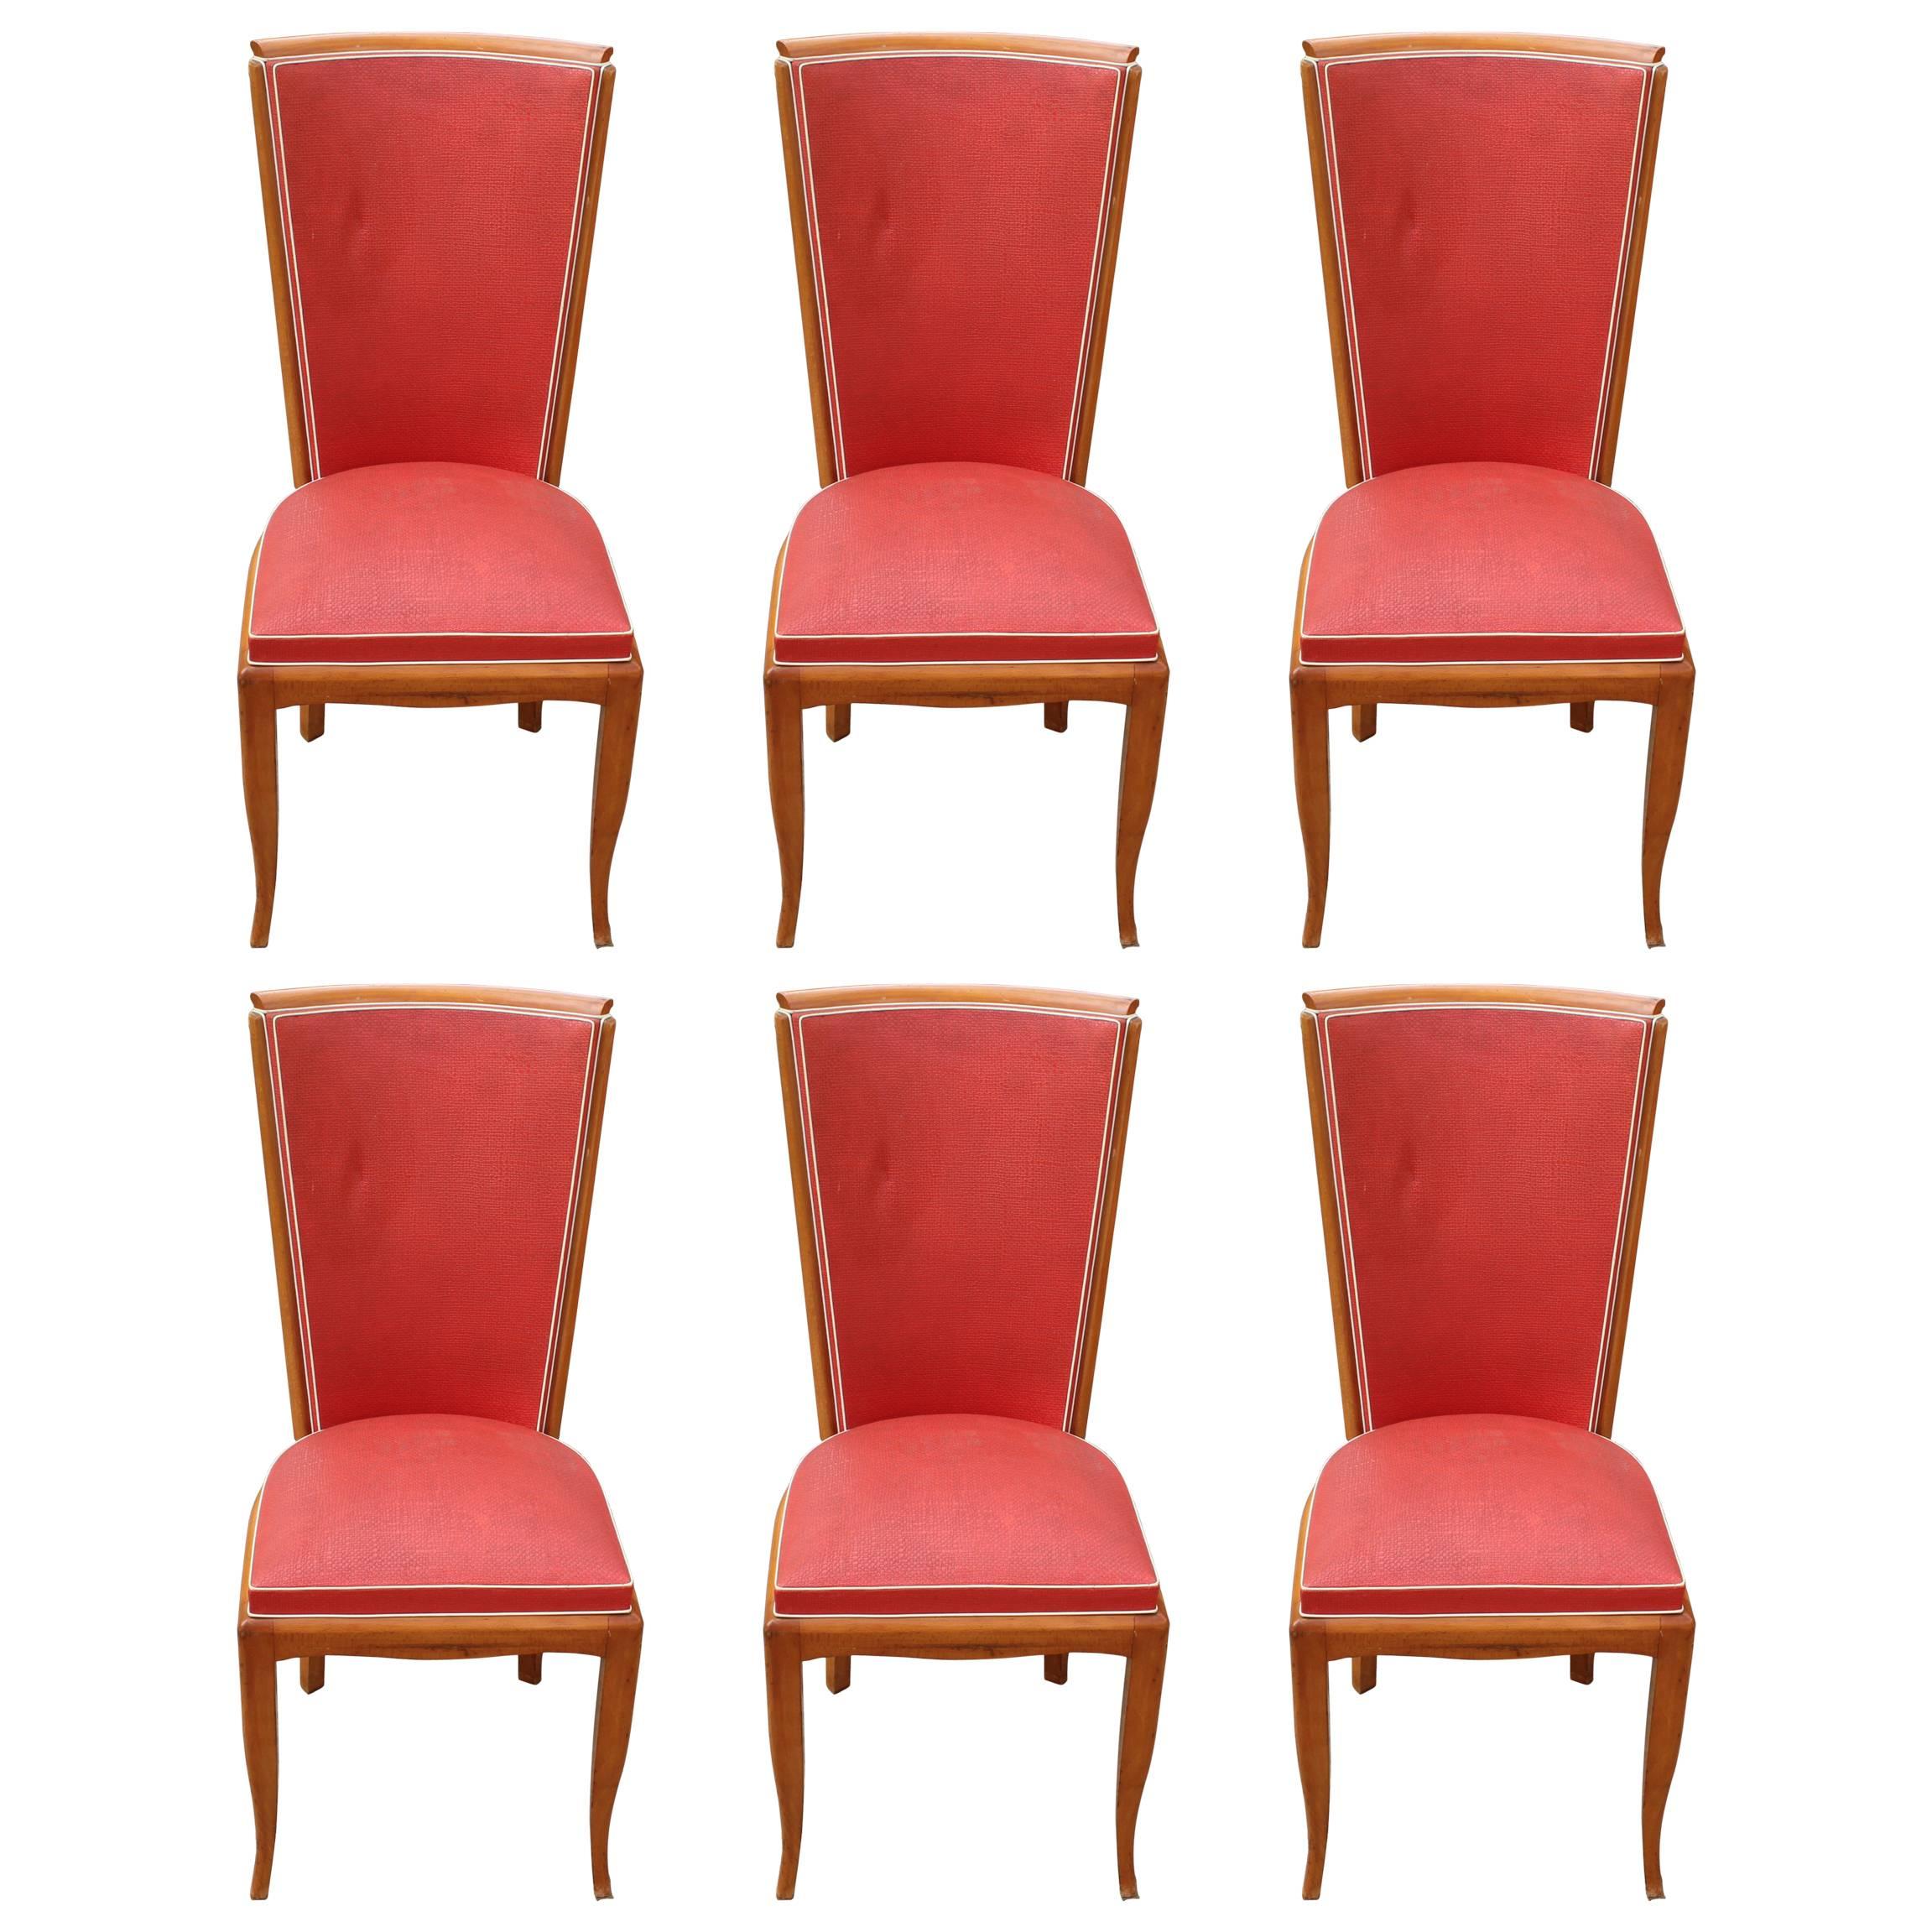 Suite of Six French Art Deco Dining Chairs Mahogany, circa 1940